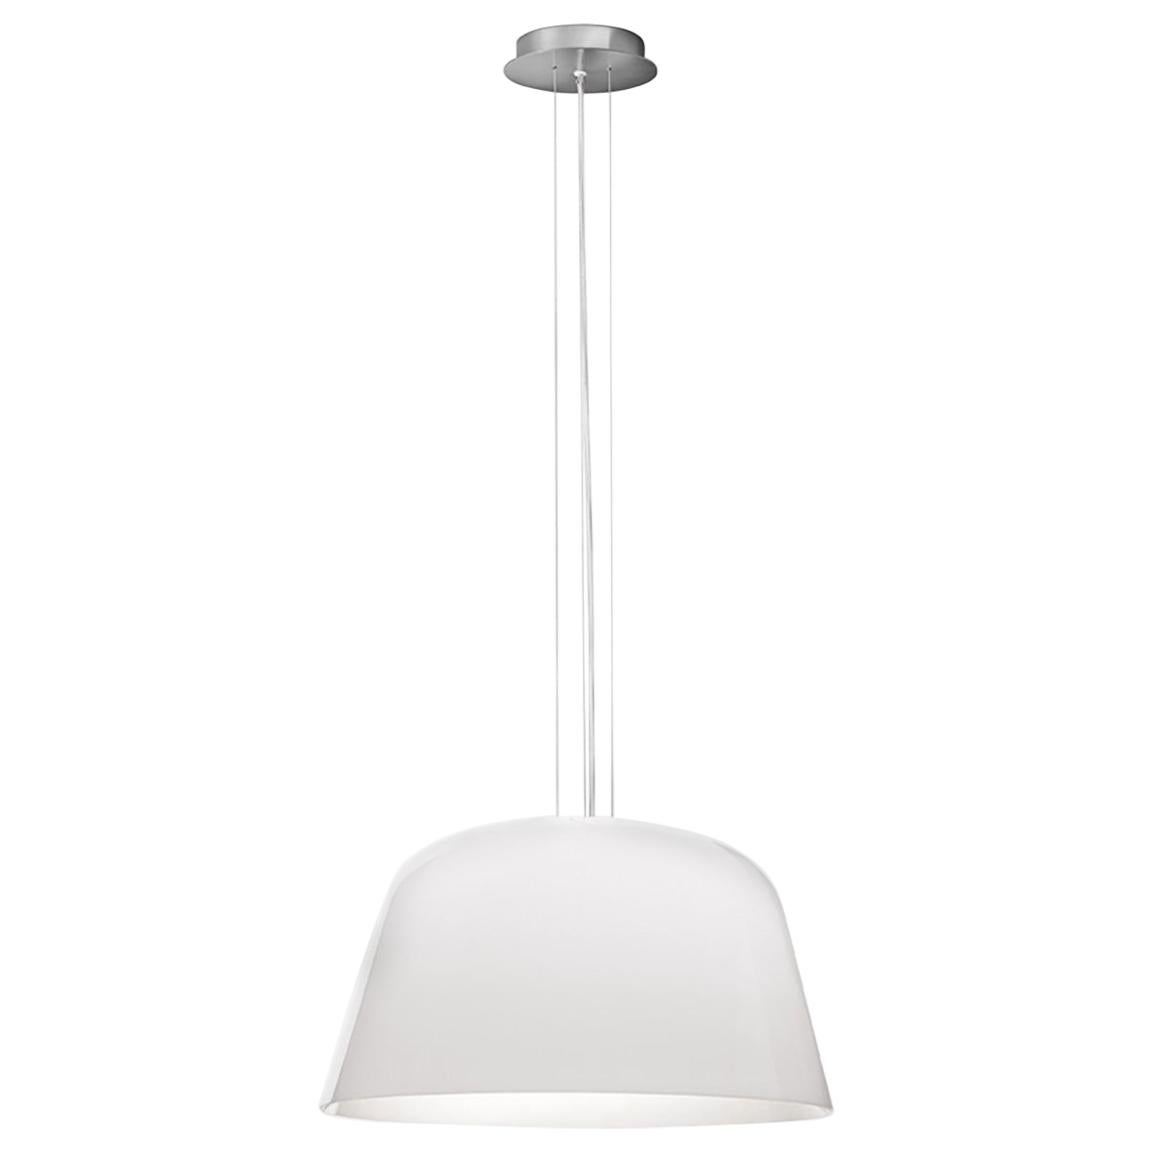 Modern Leucos Ayers S 38 Pendant Light in Glossy White and Satin Nickel by Marco Piva For Sale